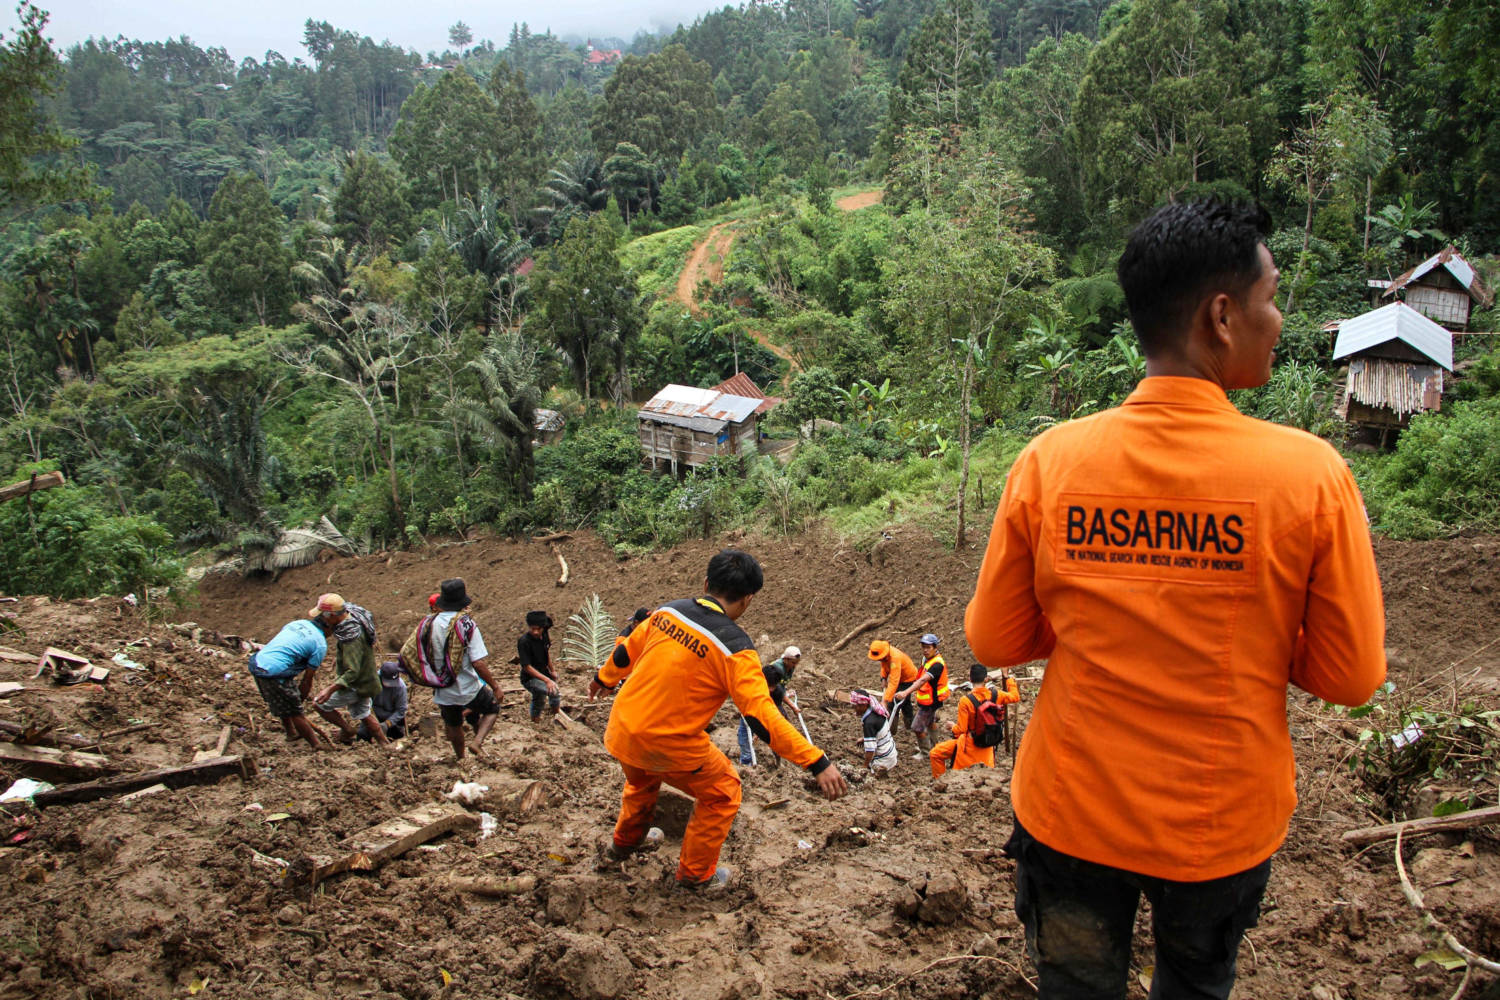 Indonesian Rescue Members With Residents Evacuated People From The Site Of A Landslide Triggered By High Intensity Rains, That Affected Two Villages In Tana Toraja